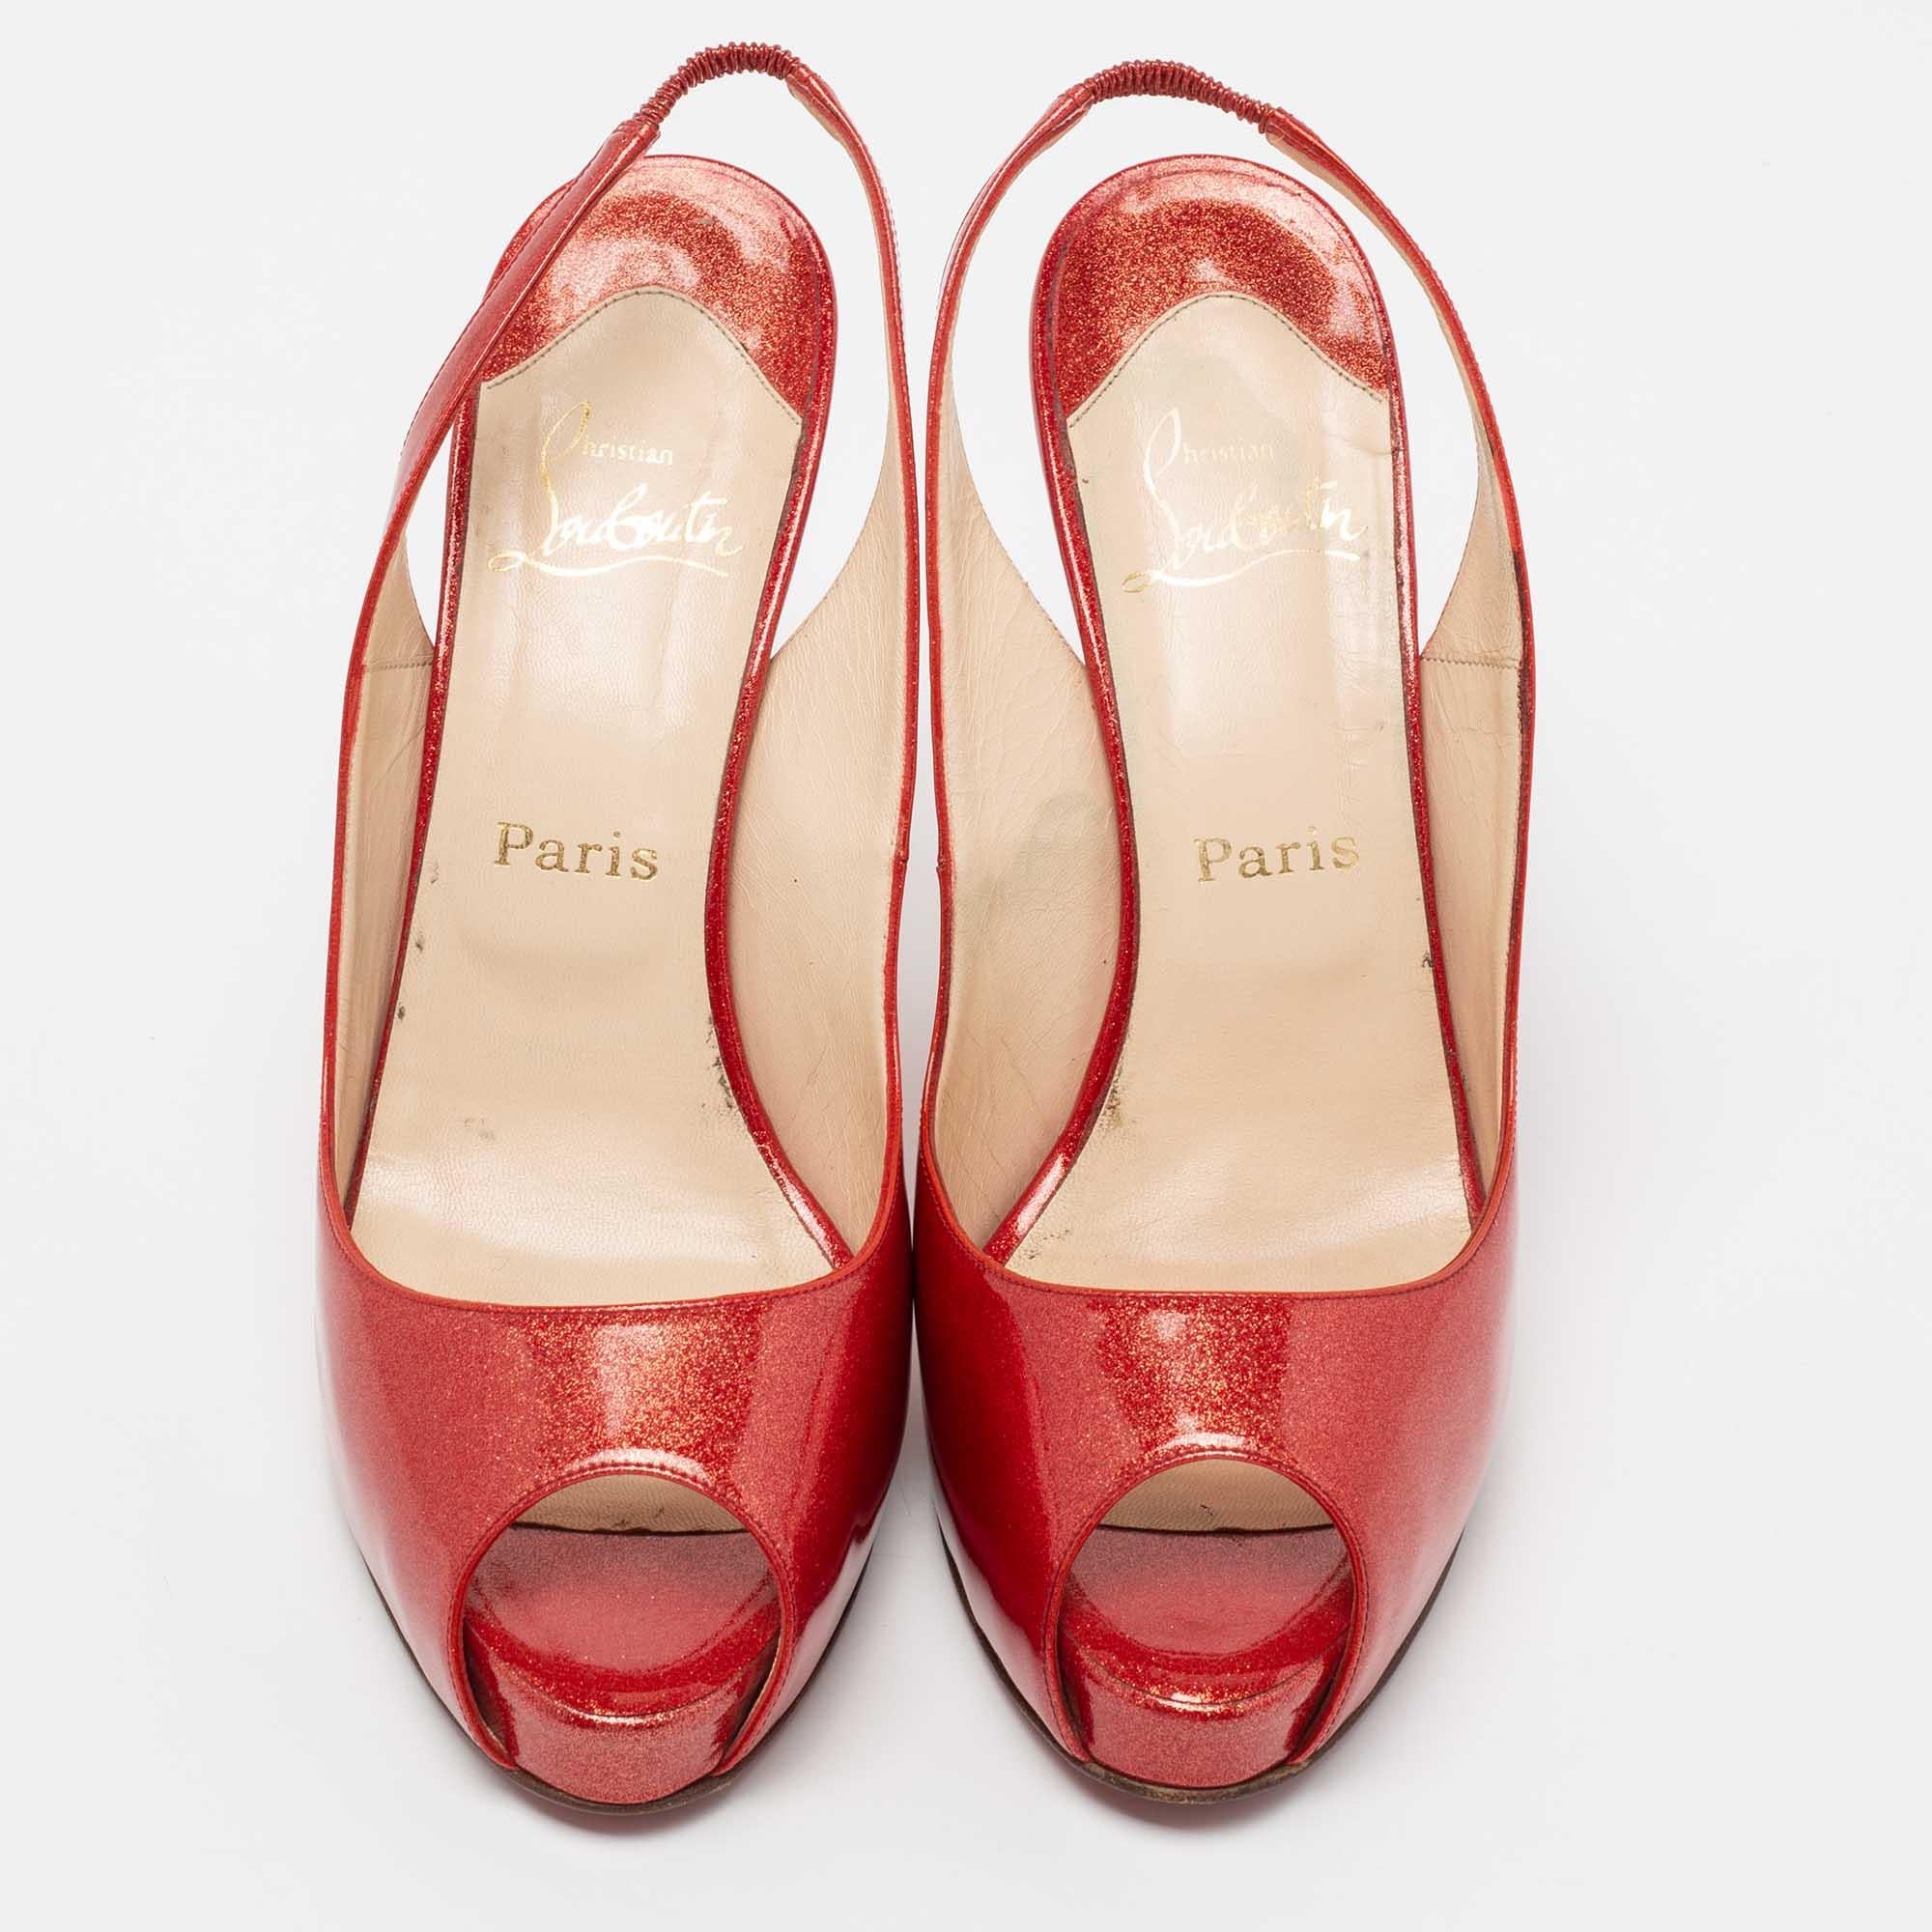 This pair of Christian Louboutin sandals is perfect for party nights. Step out in style while flaunting the glamorously red patent leather sandals. They feature a glittering exterior, peep toes, slingbacks, and 12 cm heels.

